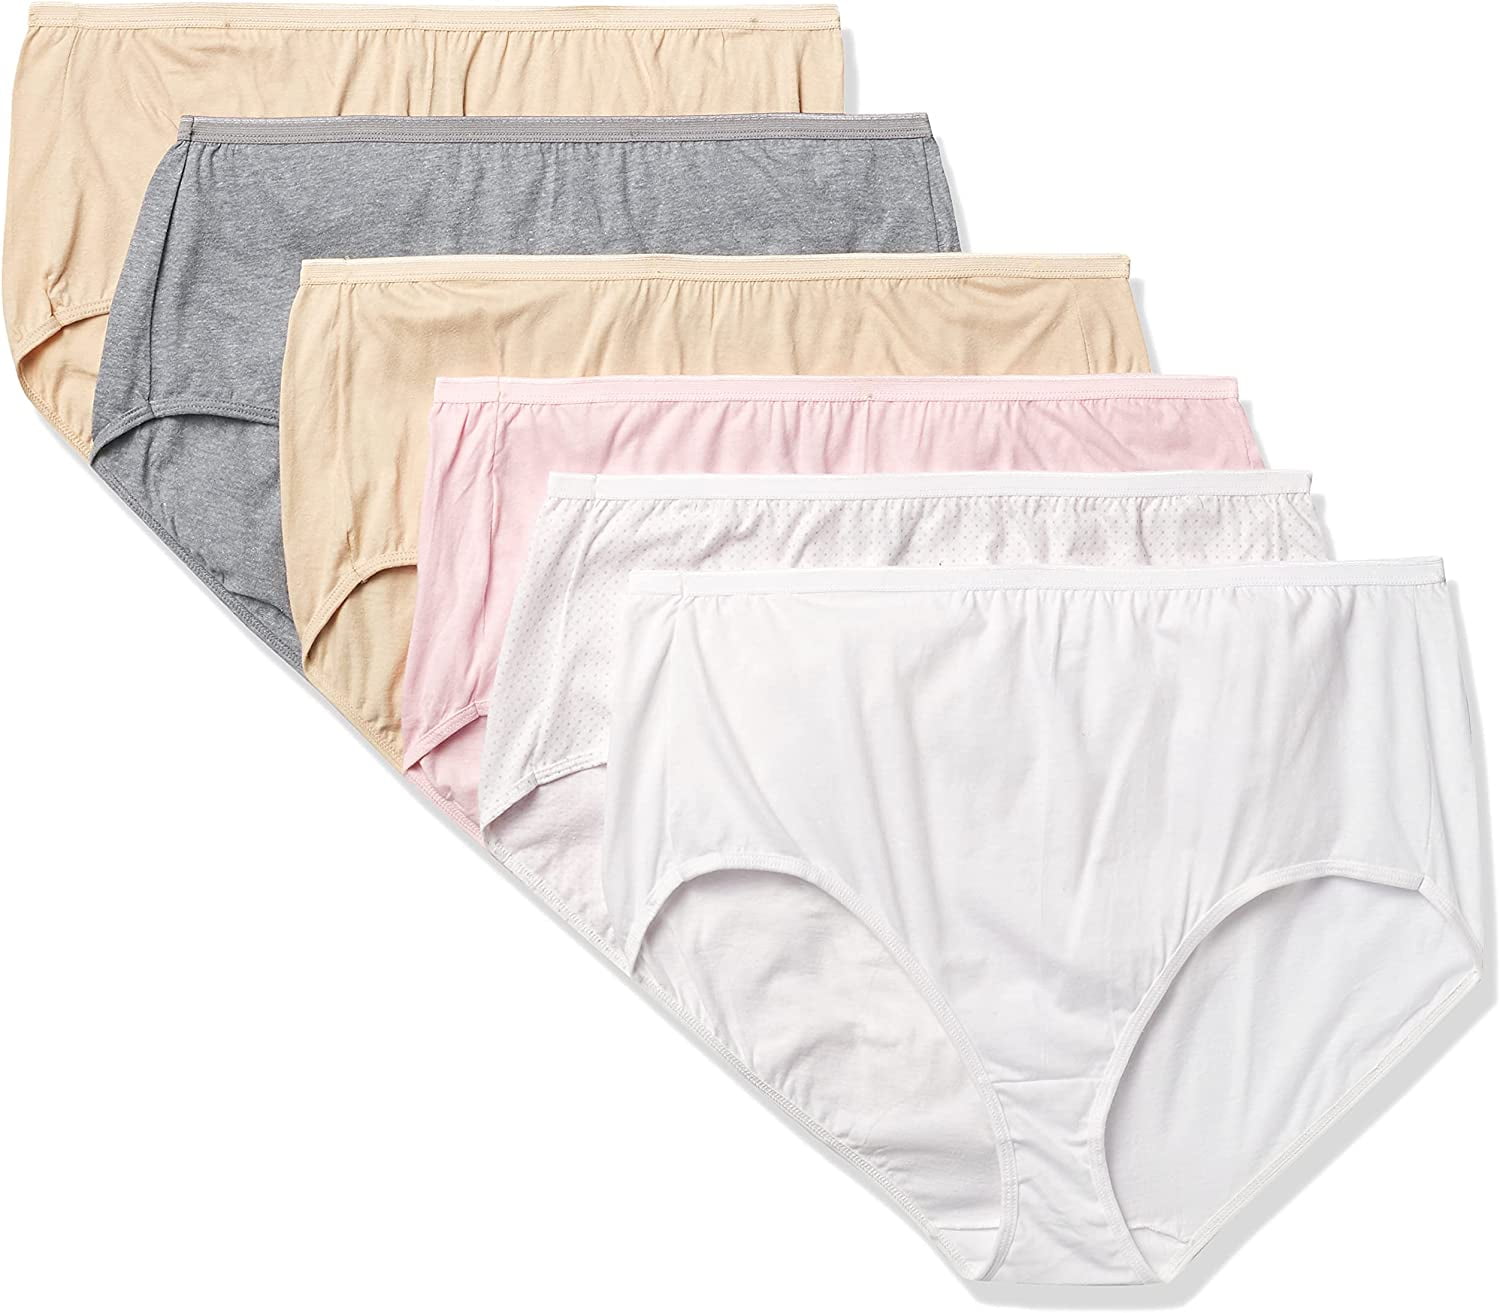 Hanes Just My Size Women's Cotton Briefs, 6-Pack (Plus ) Assorted